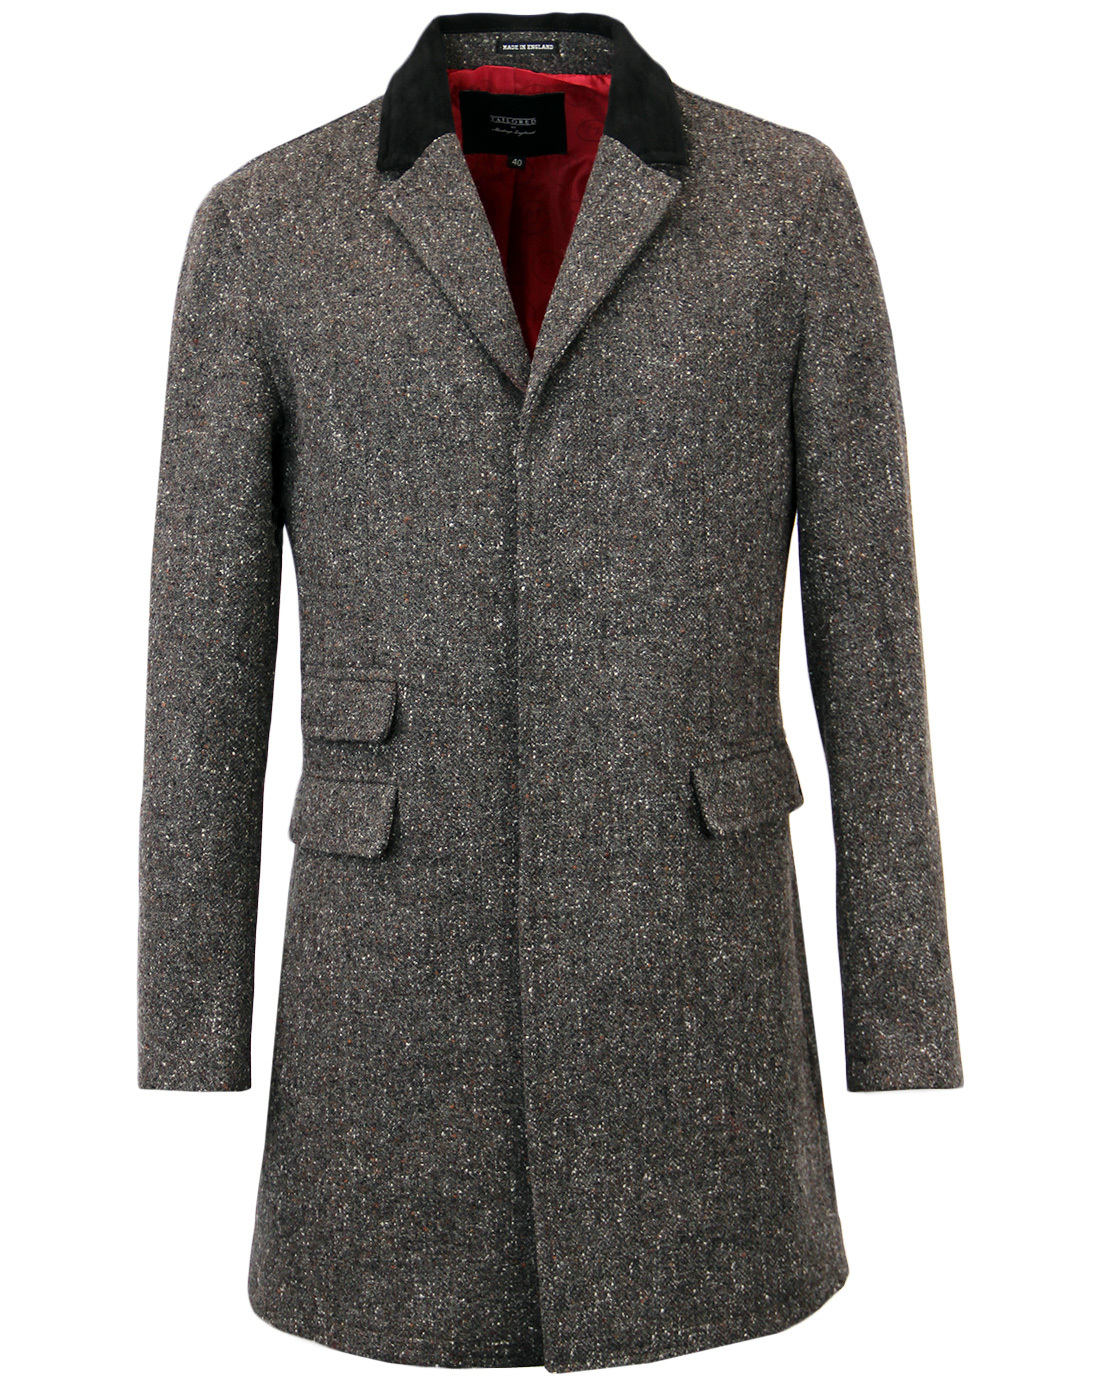 TAILORED by MADCAP ENGLAND Retro Mod Donegal Top Coat Grey